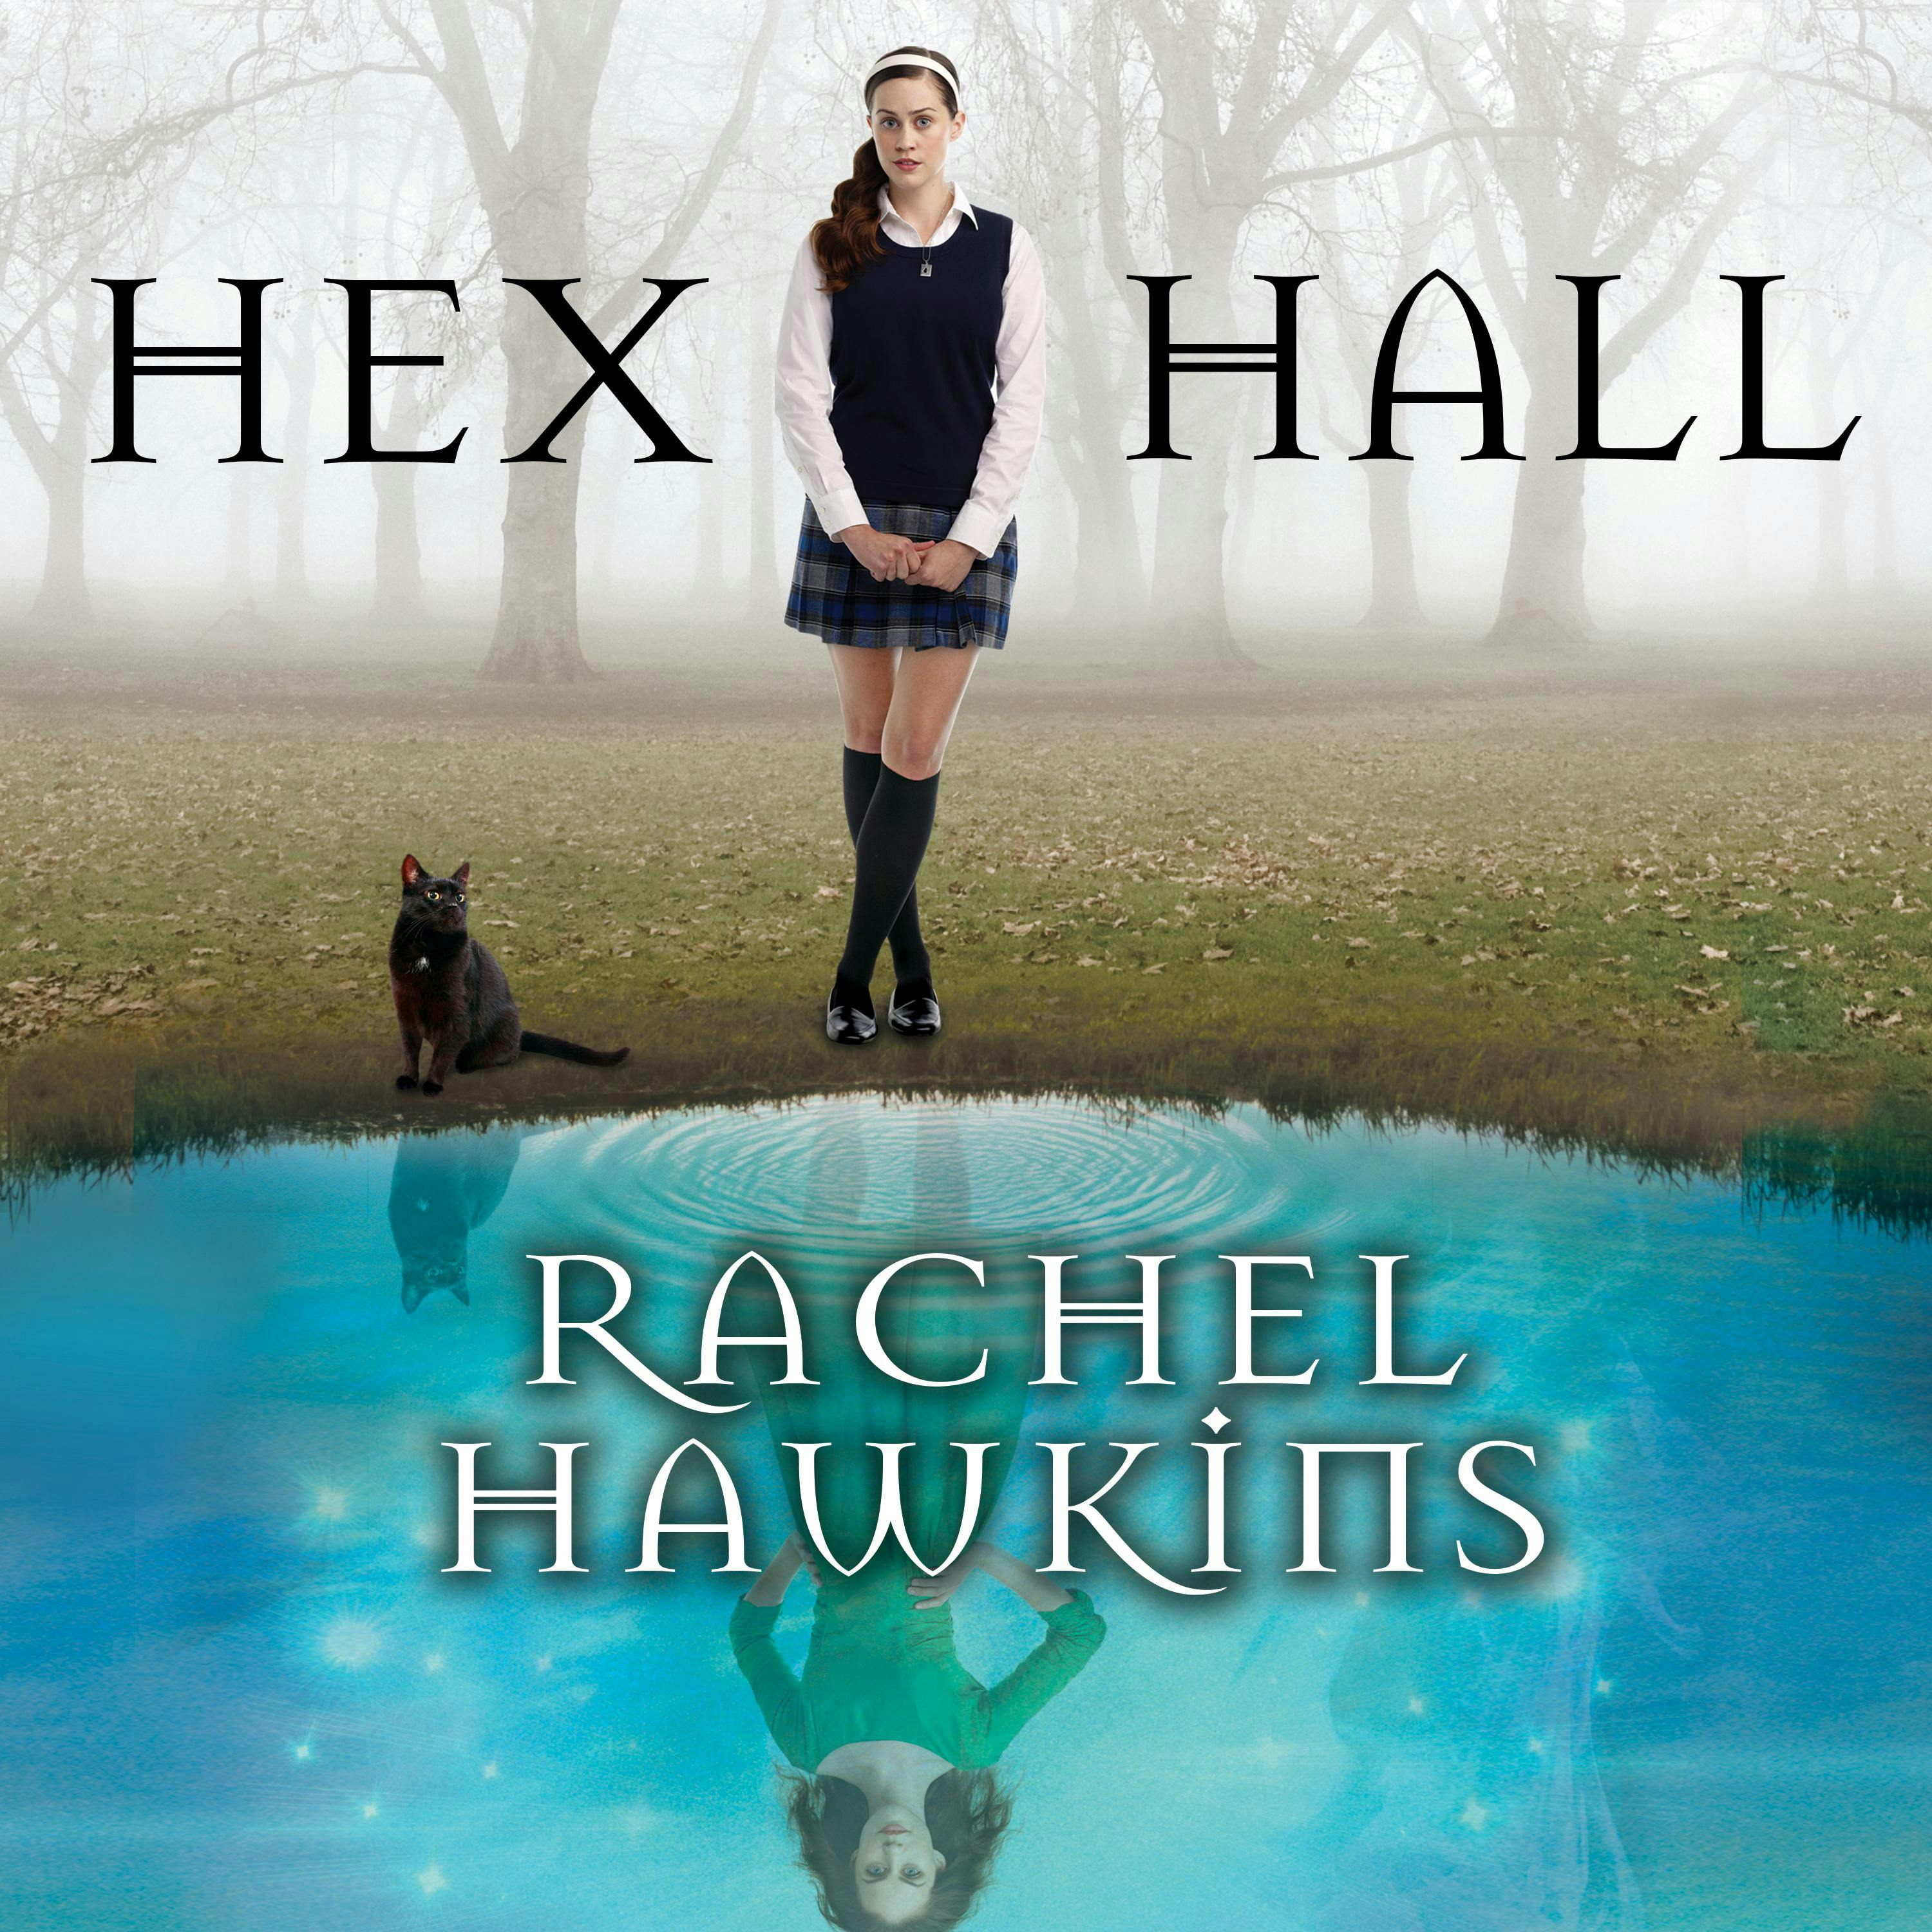 Hex Hall - undefined